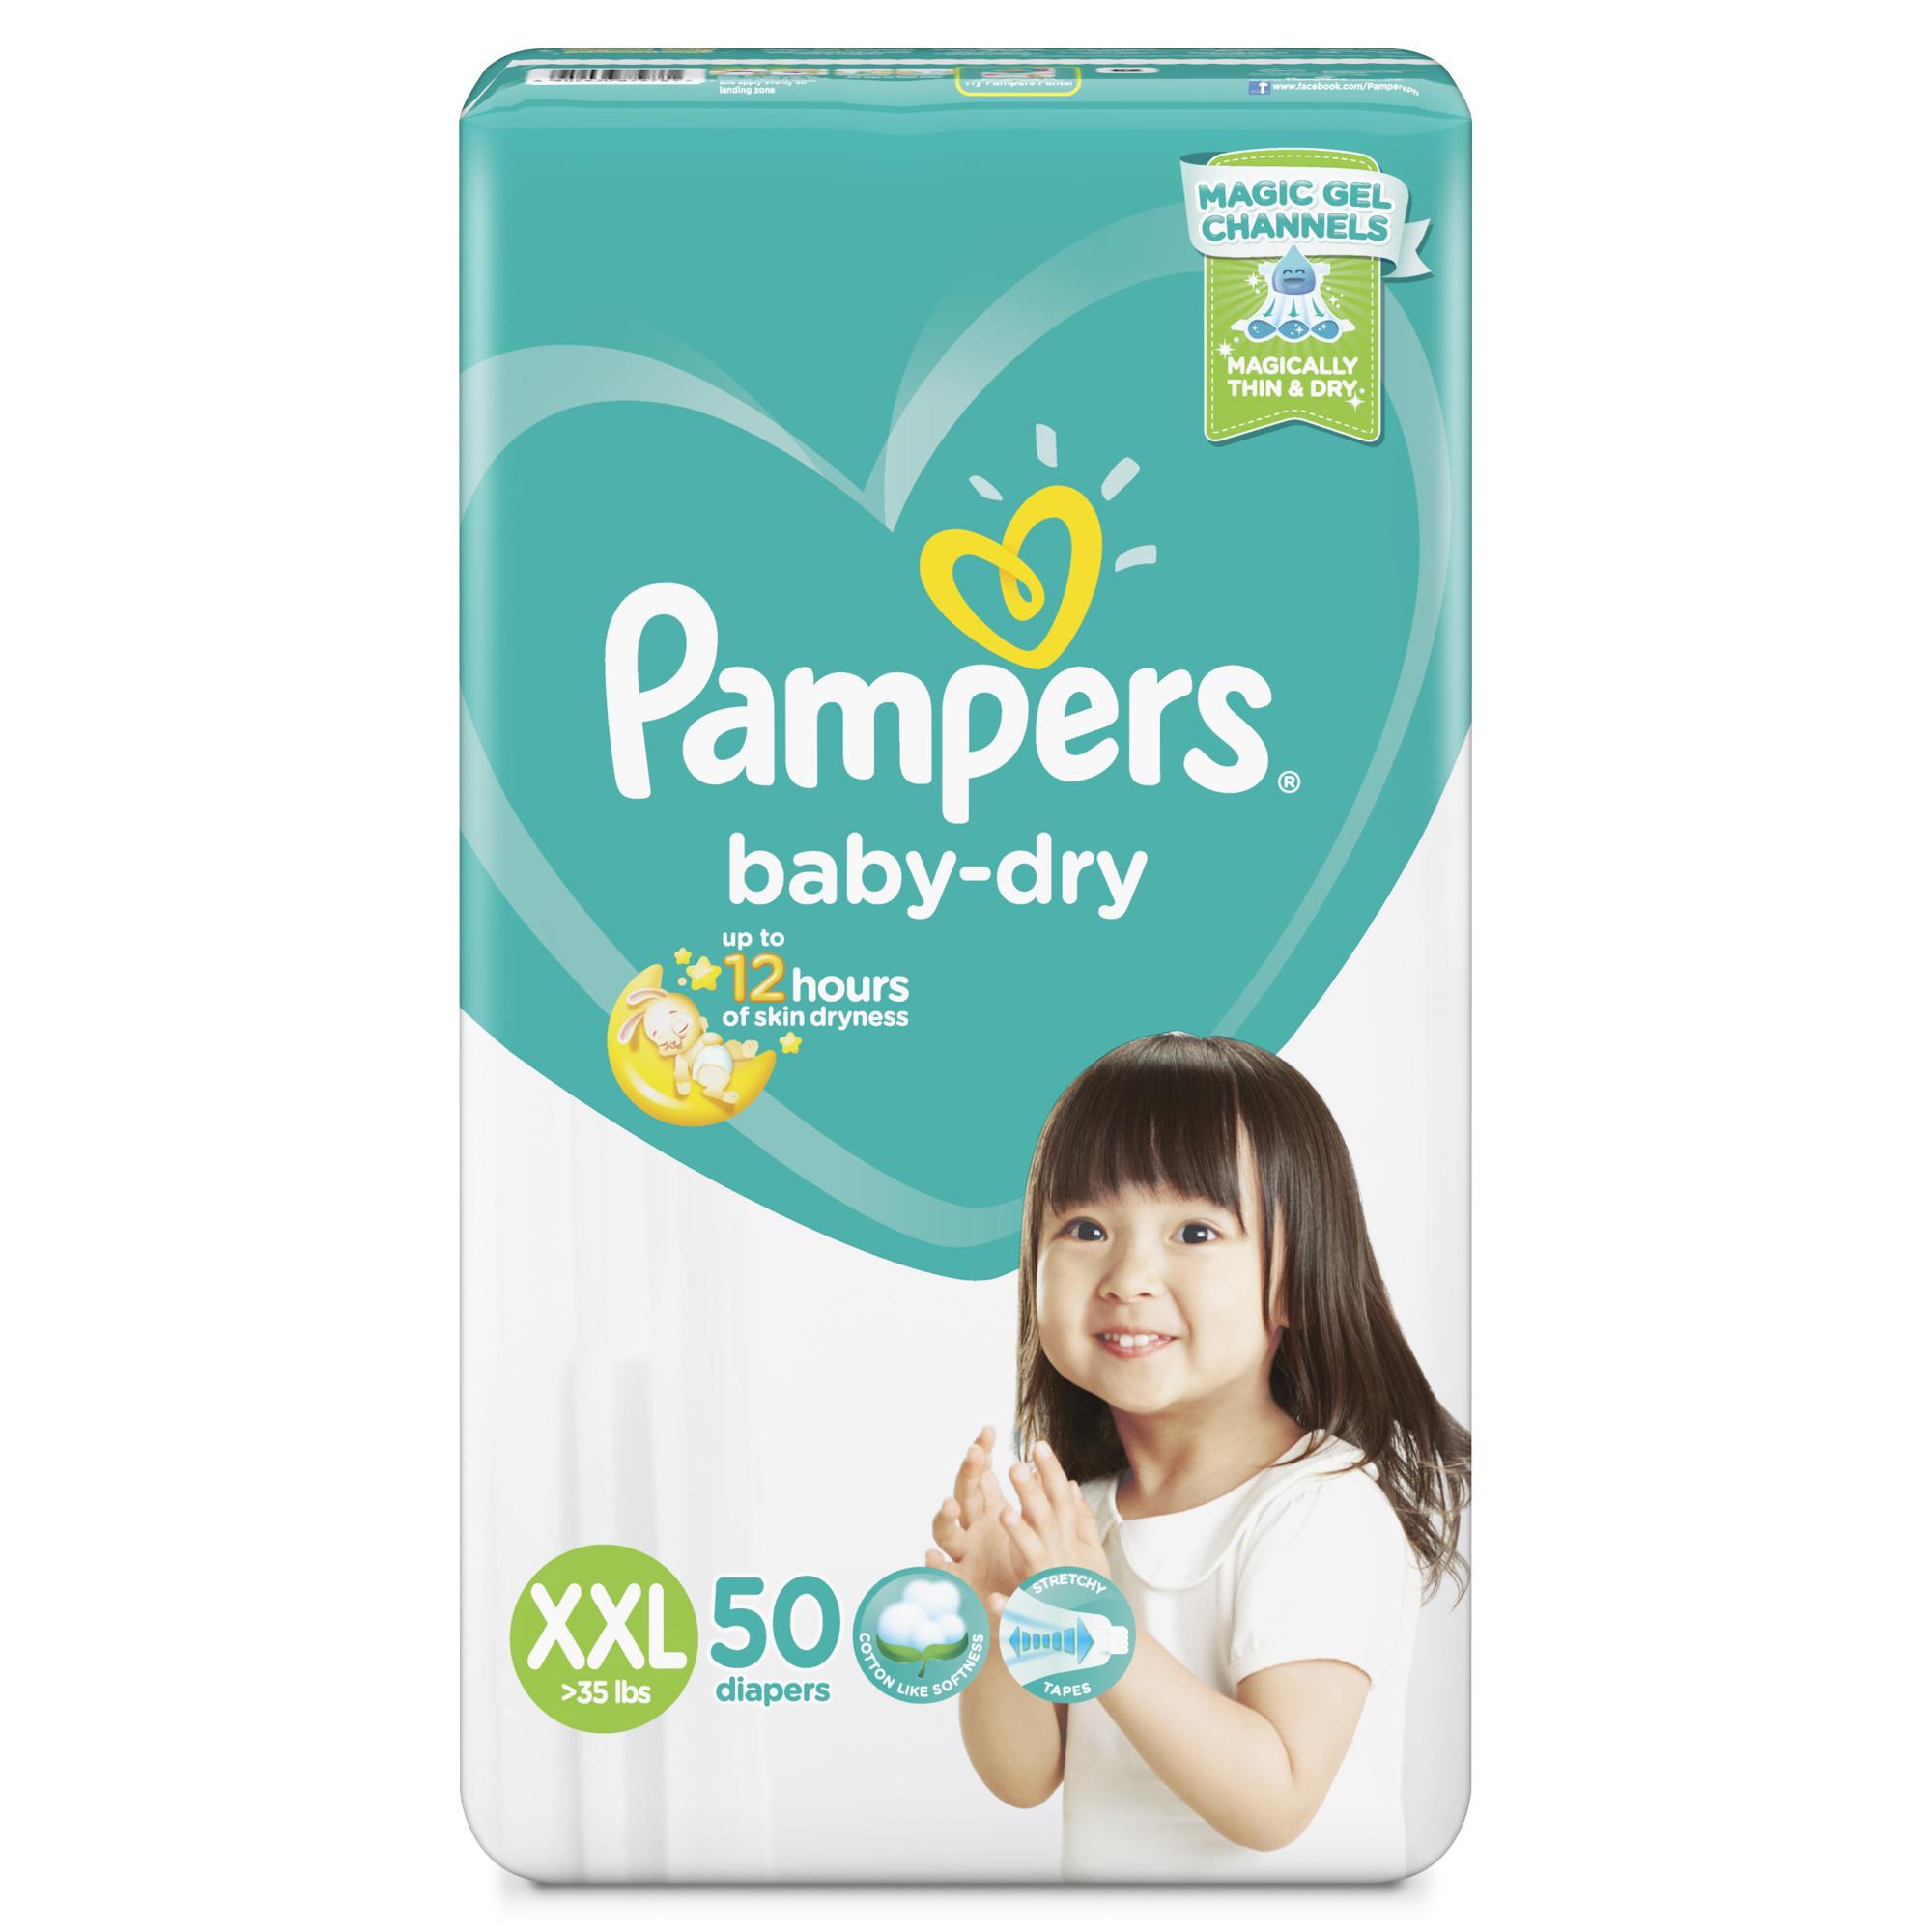 pampers xxl diapers